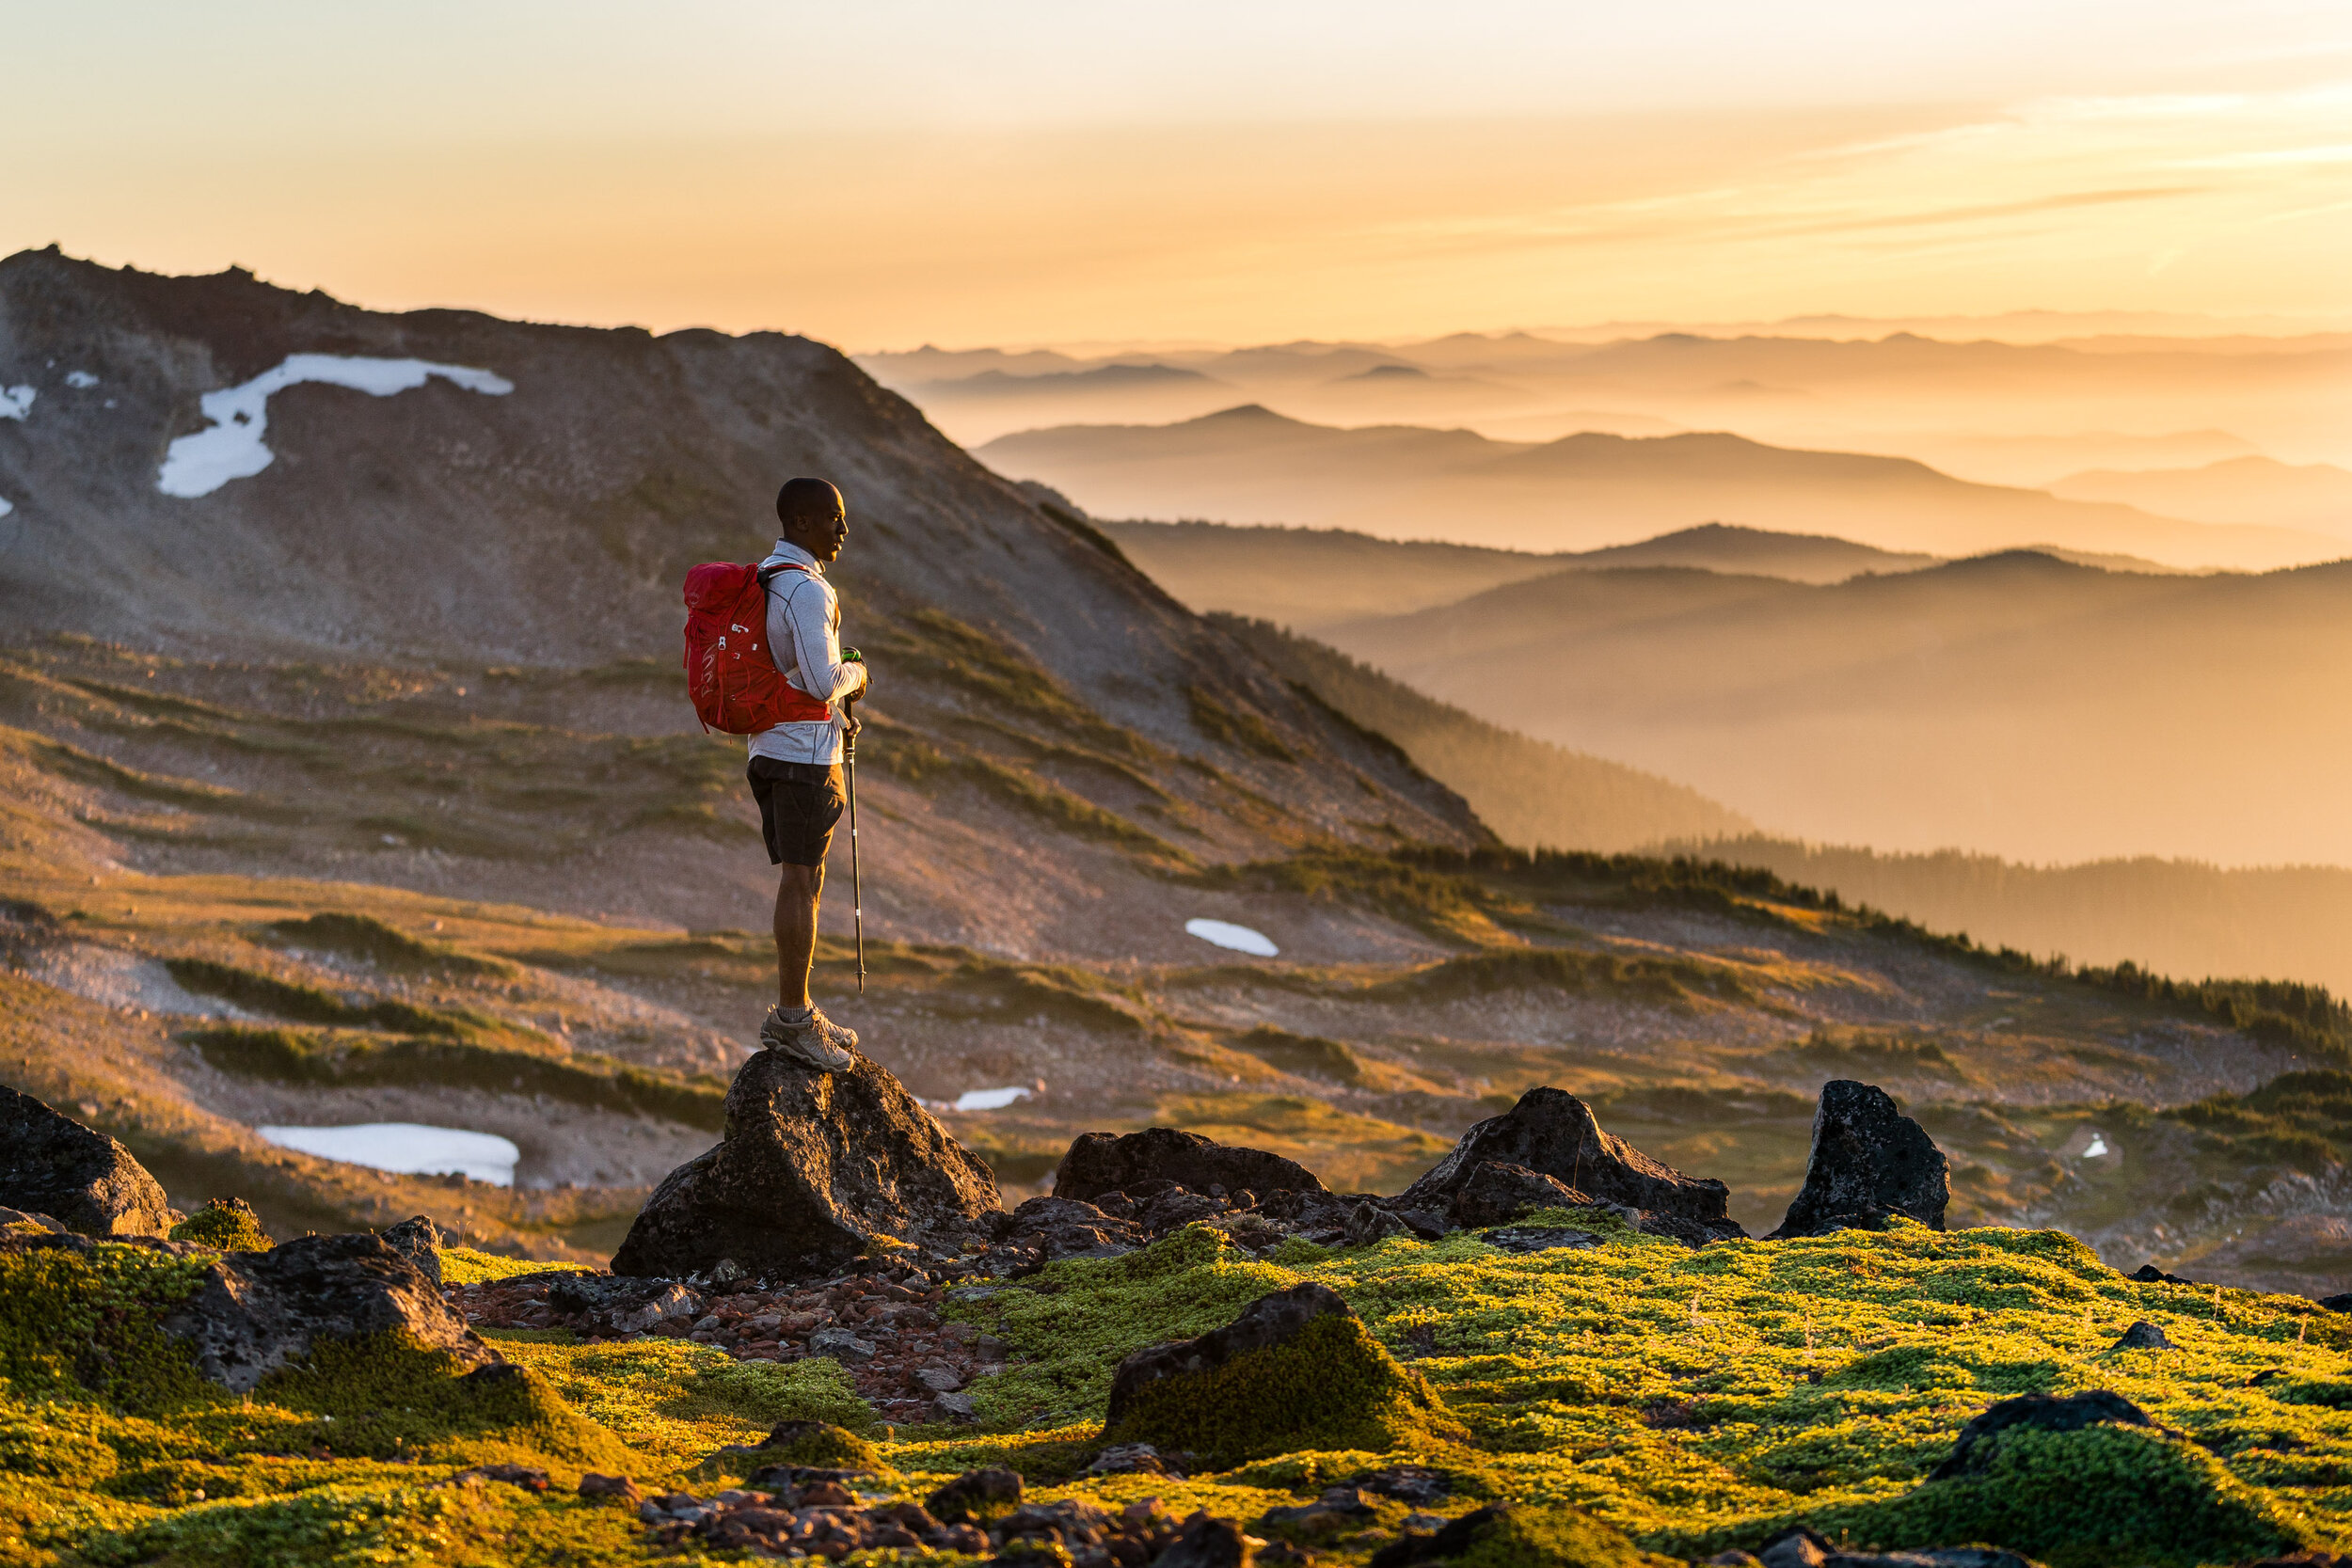  Adventure: Roger Johnson pauses during a hike to take in the sunset at Mount Rainier National Park 